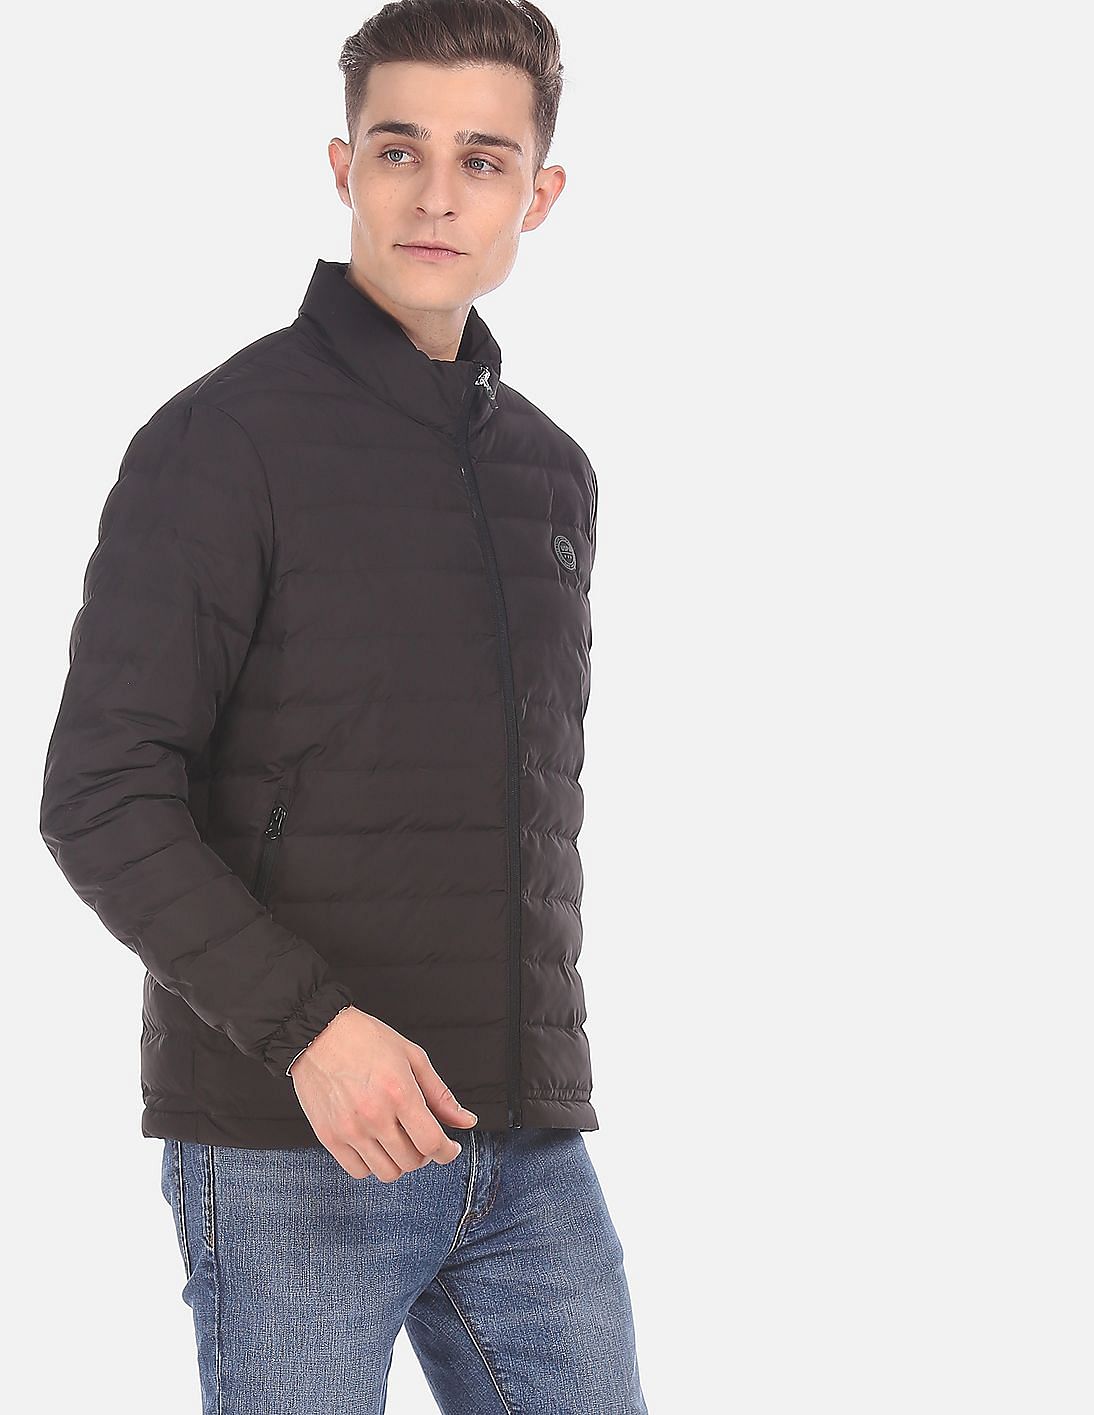 Buy U.S. Polo Assn. Men Black Solid Quilted Jacket - NNNOW.com